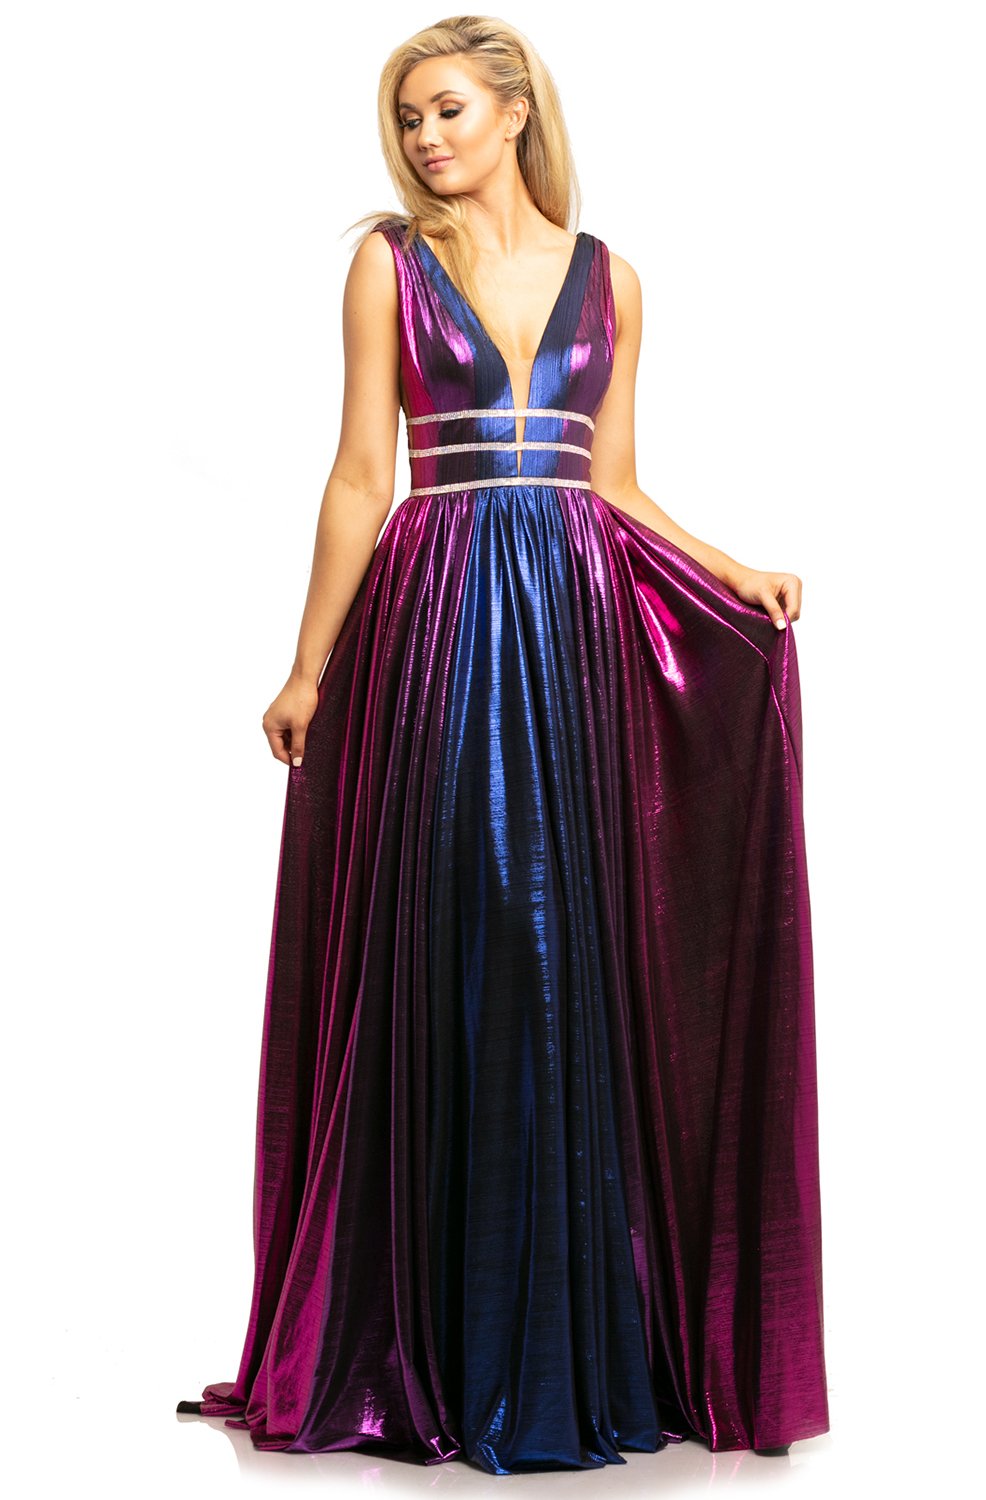 Johnathan Kayne - 2008 Plunging Multi-Colored Metallic A-Line Gown In Pink and Multi-Color